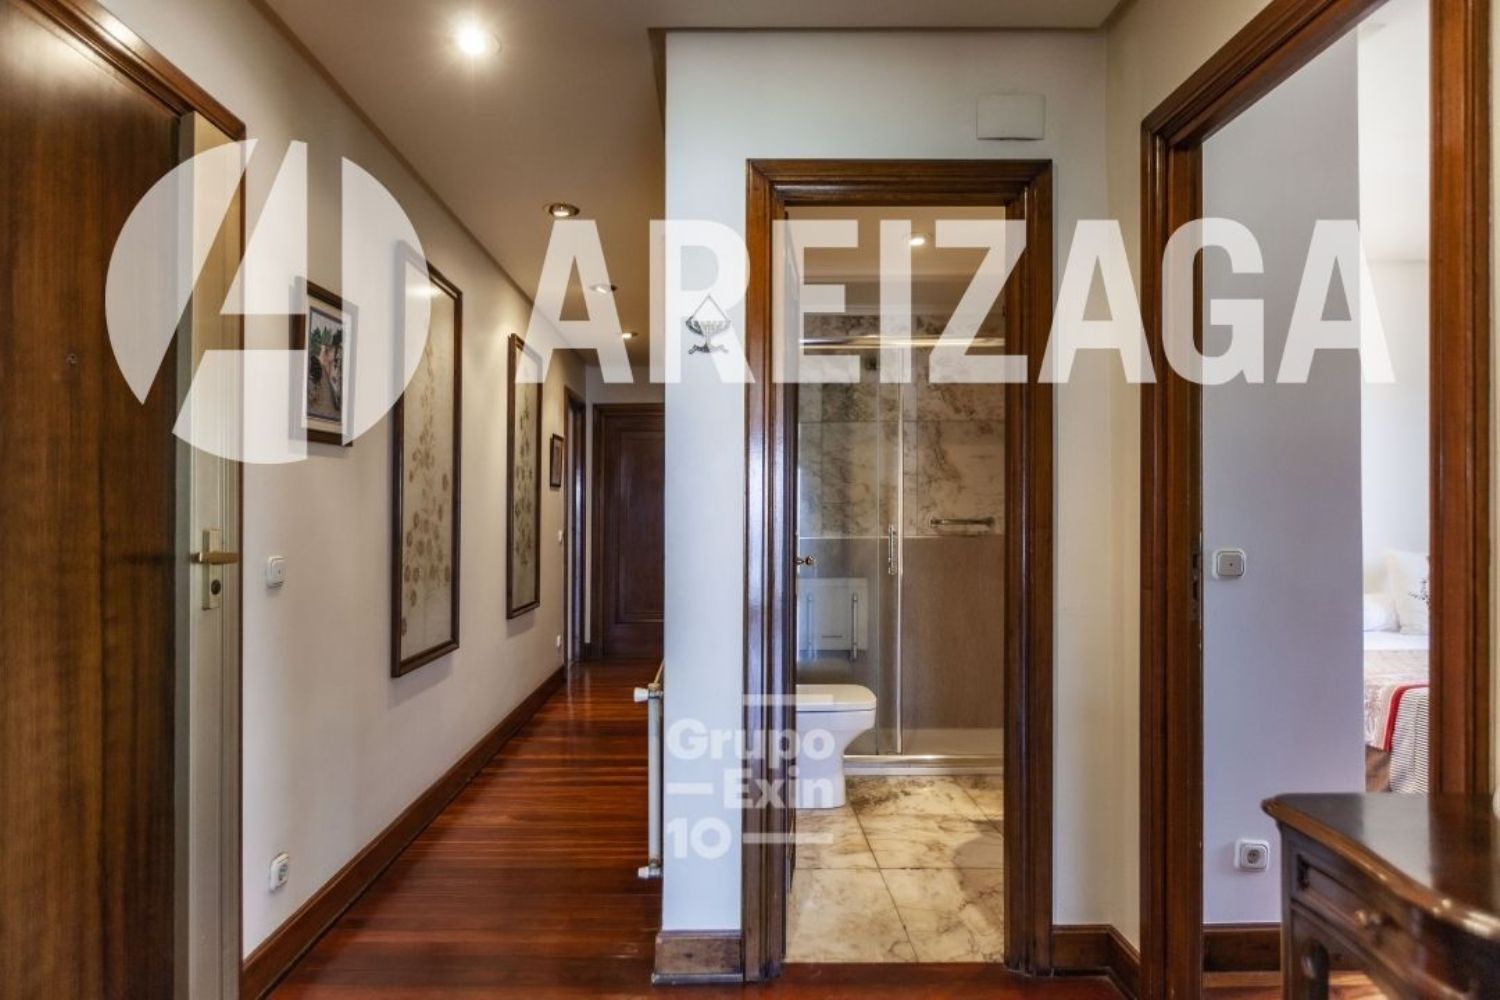 Apartment for sale on the seafront in P. de Miraconcha, in Donostia-San Sebastian